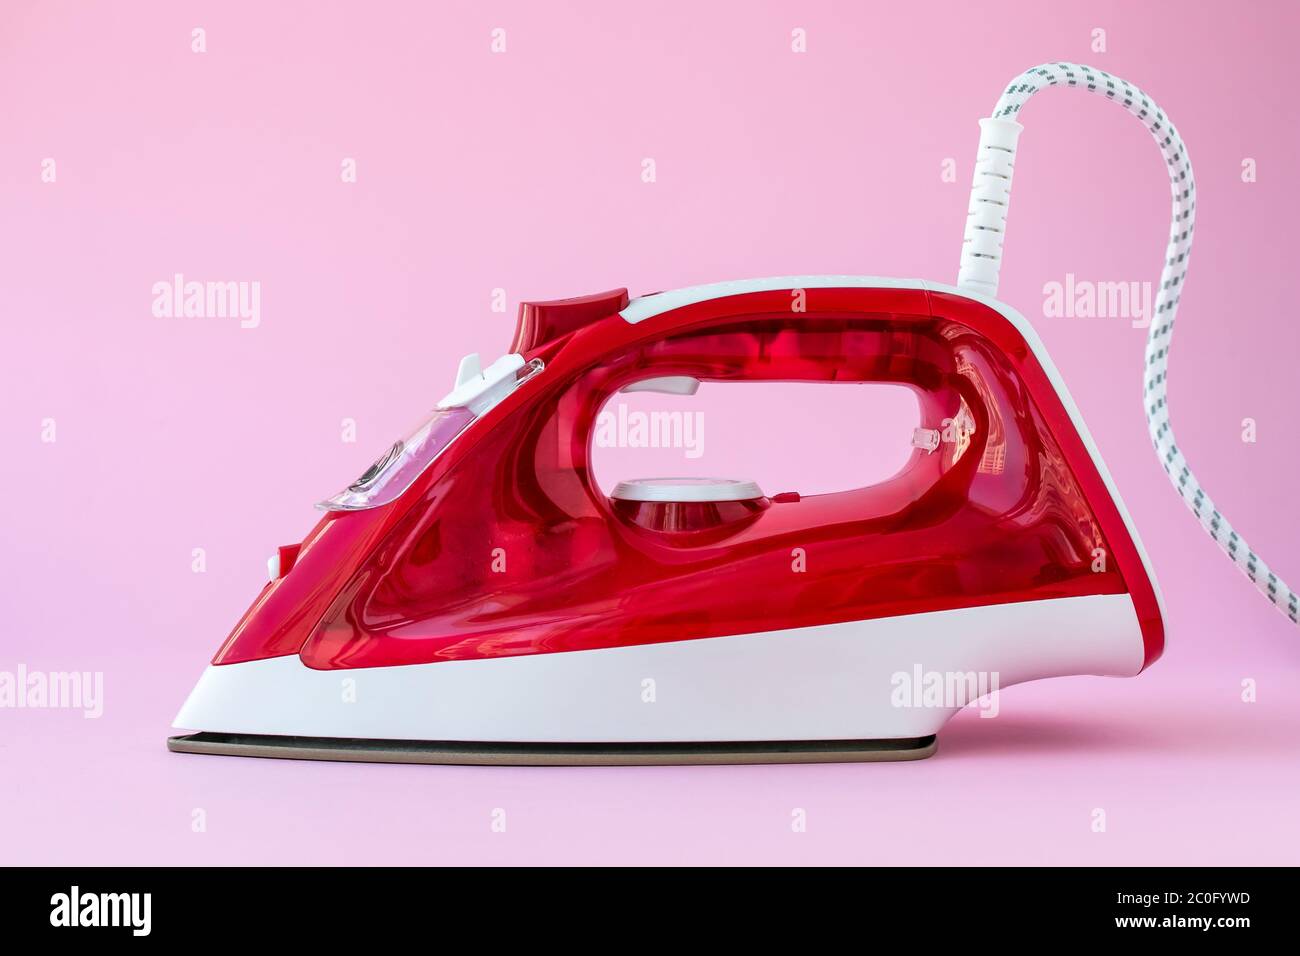 Red plastic iron on pink background. Appliance for ironing clothes, housework concept Stock Photo